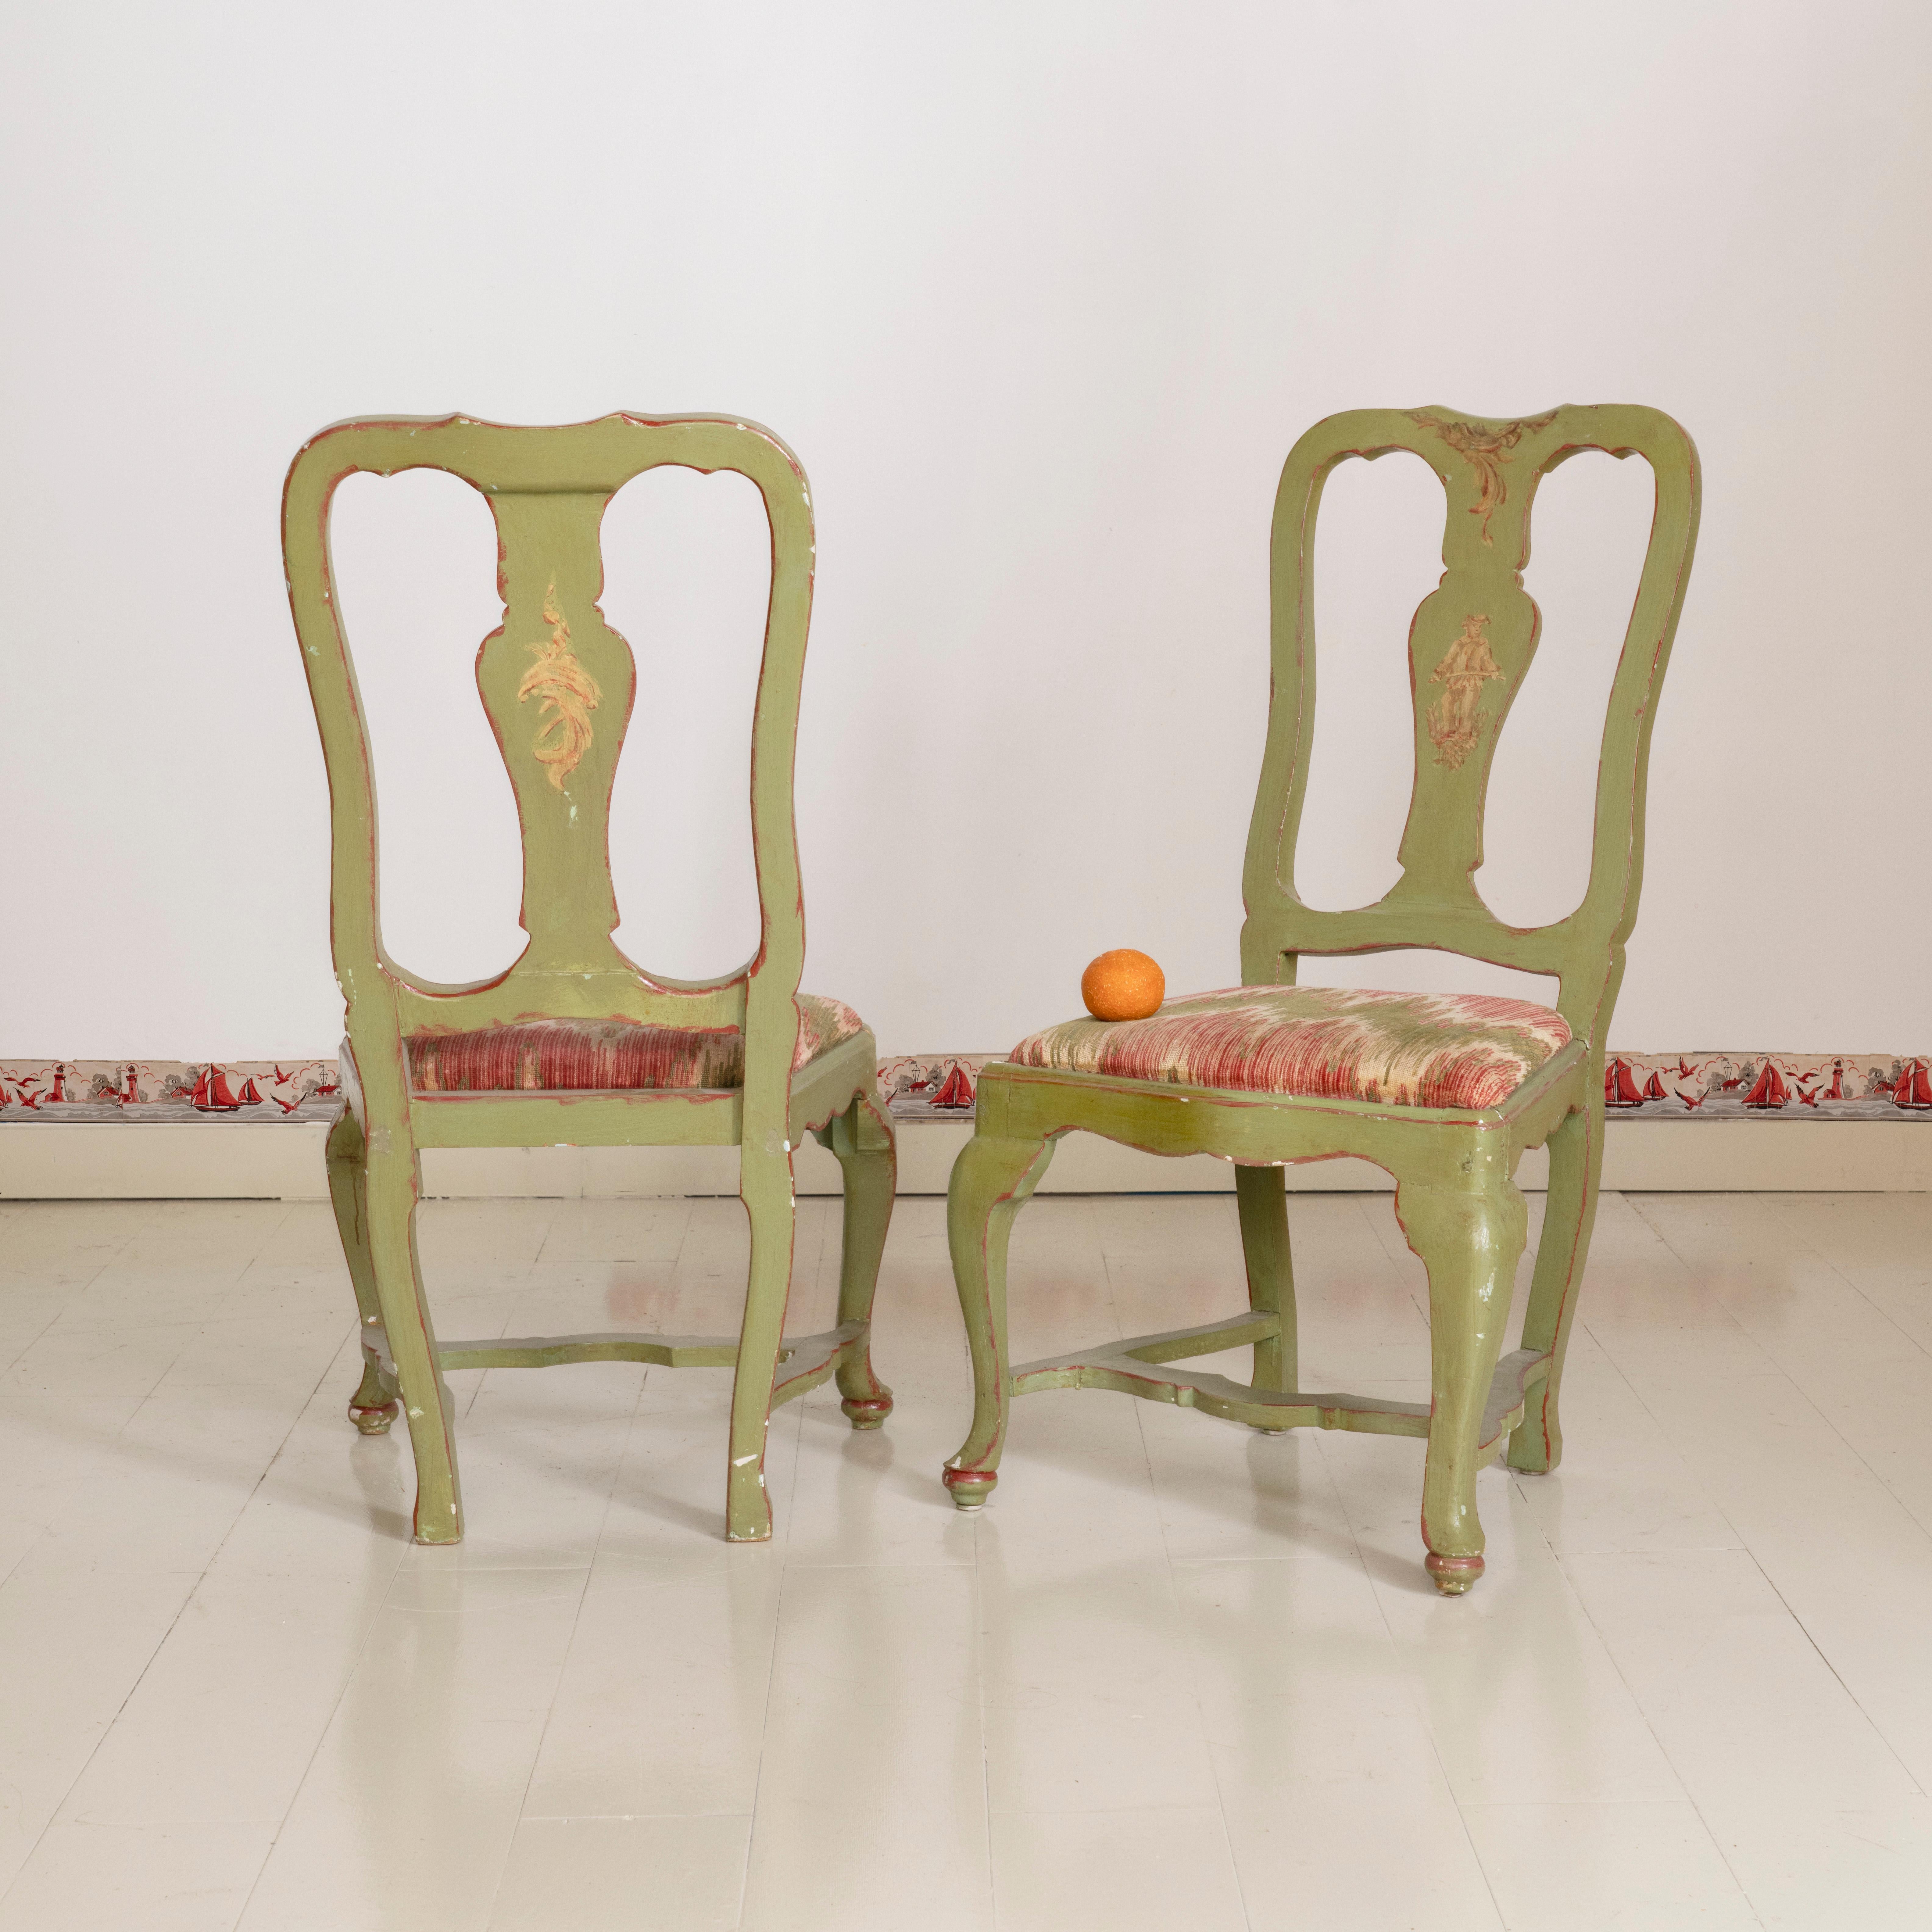 painted chairs for sale